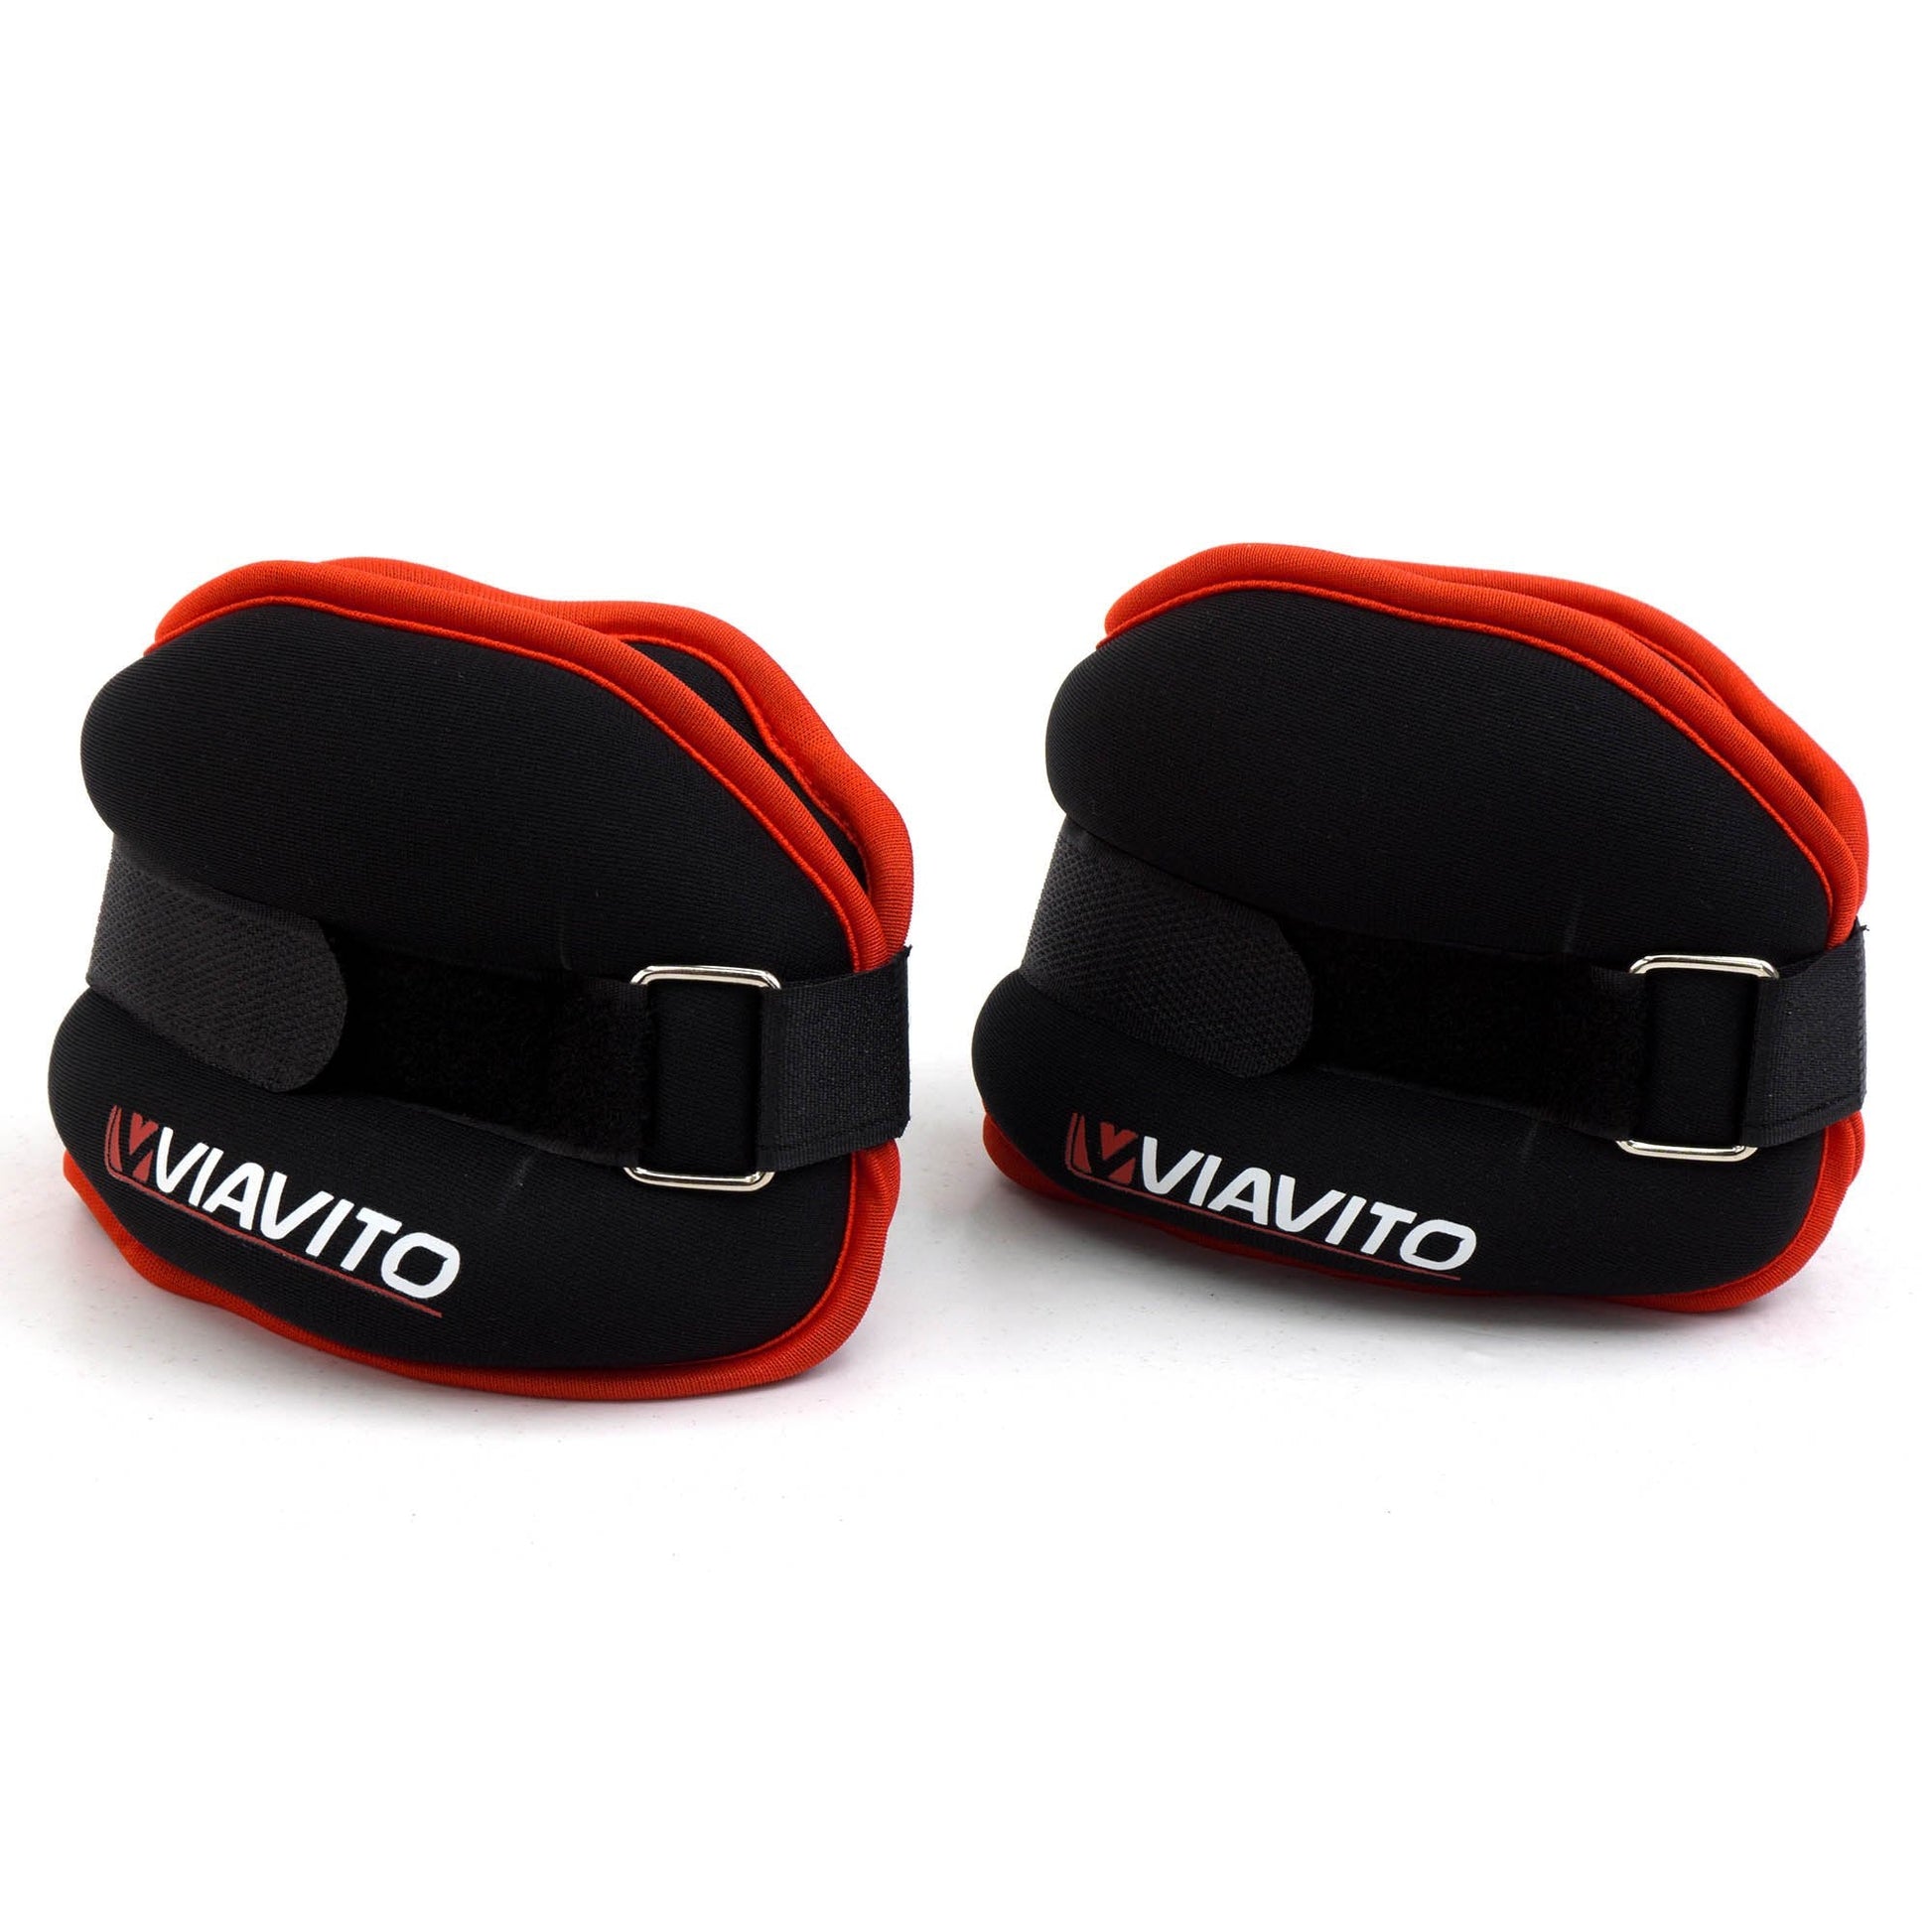 |Viavito 2 x 1.5kg Ankle Weights - Folded|